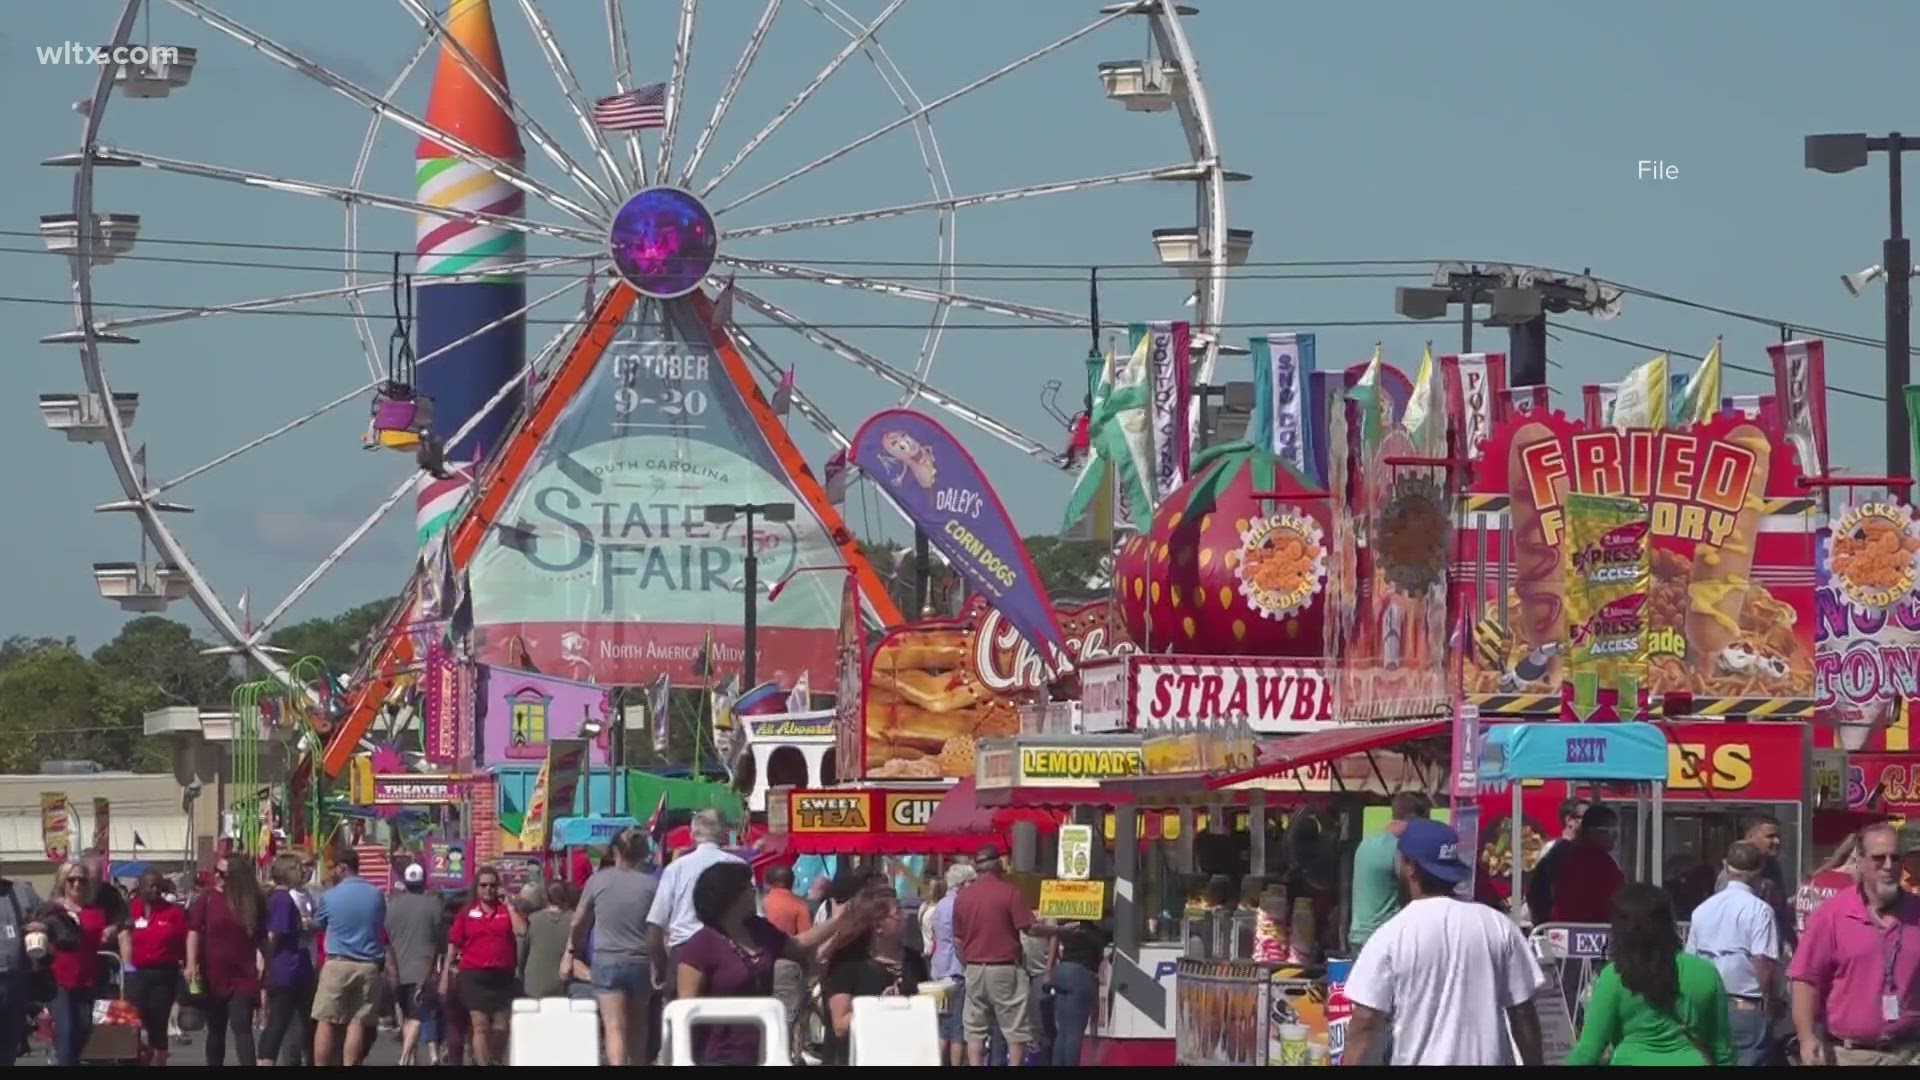 Time to sign up for the South Carolina State Fair